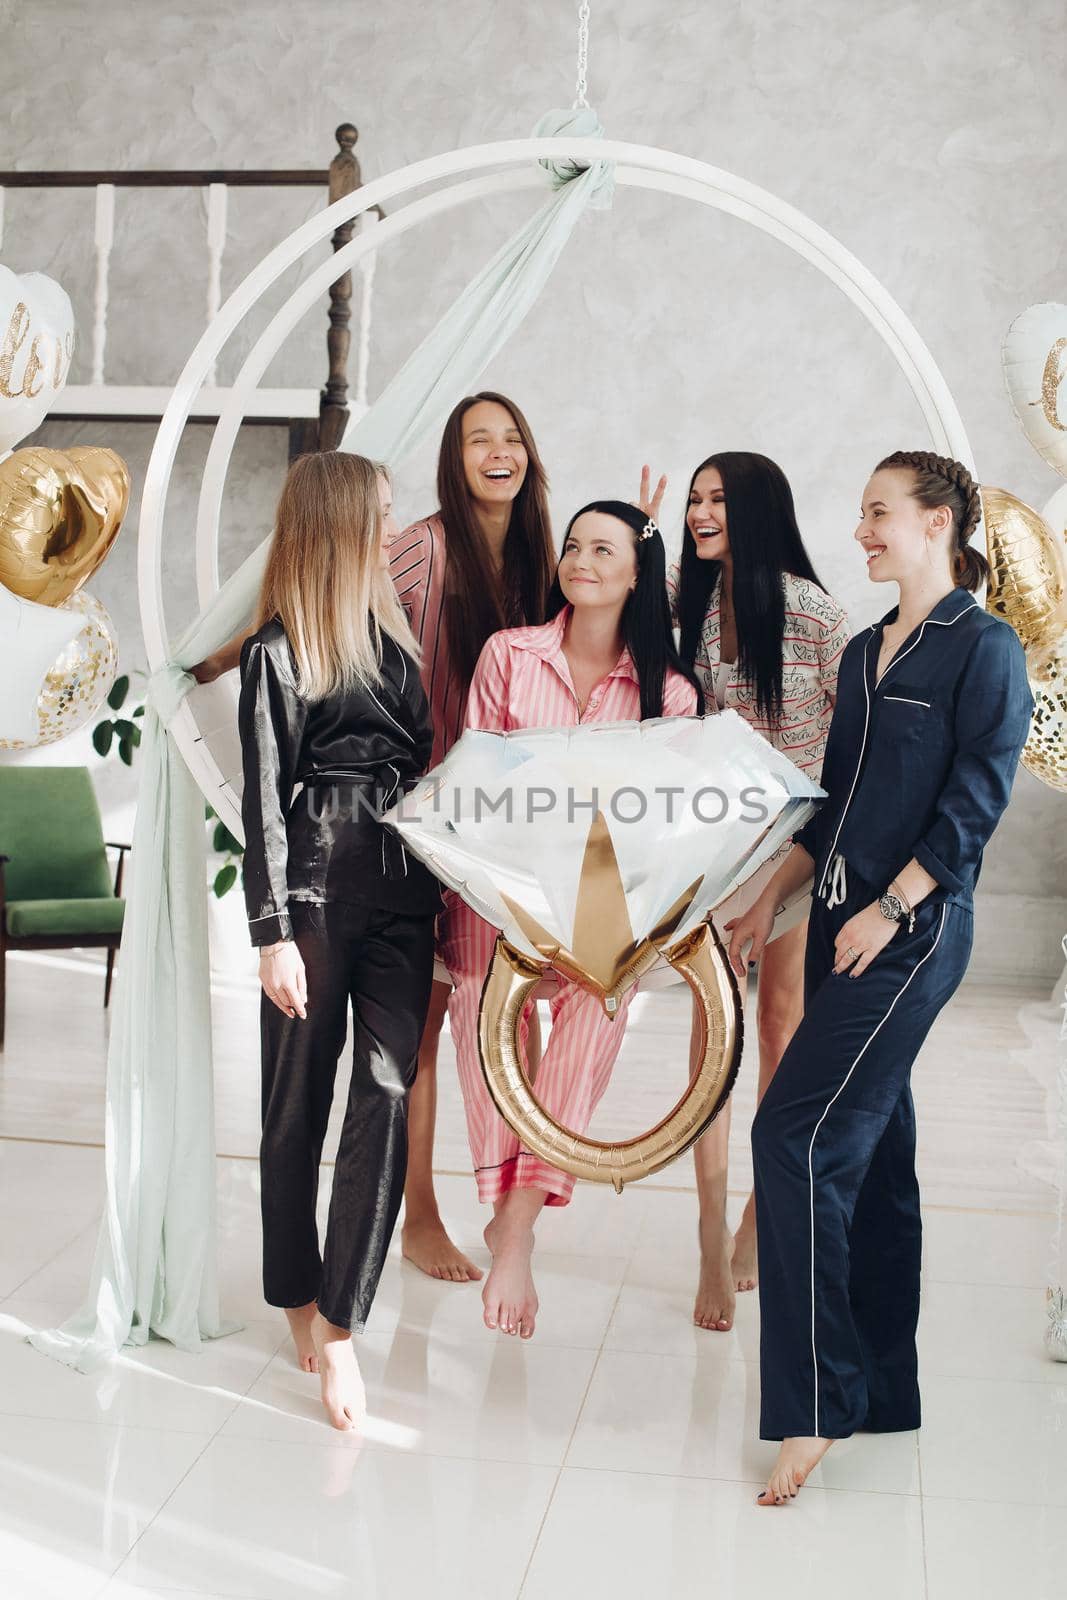 Five friends celebrating the party dedicated to a bachelorette in the middle. Hen party celebration. Girls laughing and smiling with black-haired girl in the middle holding a big balloon ring.